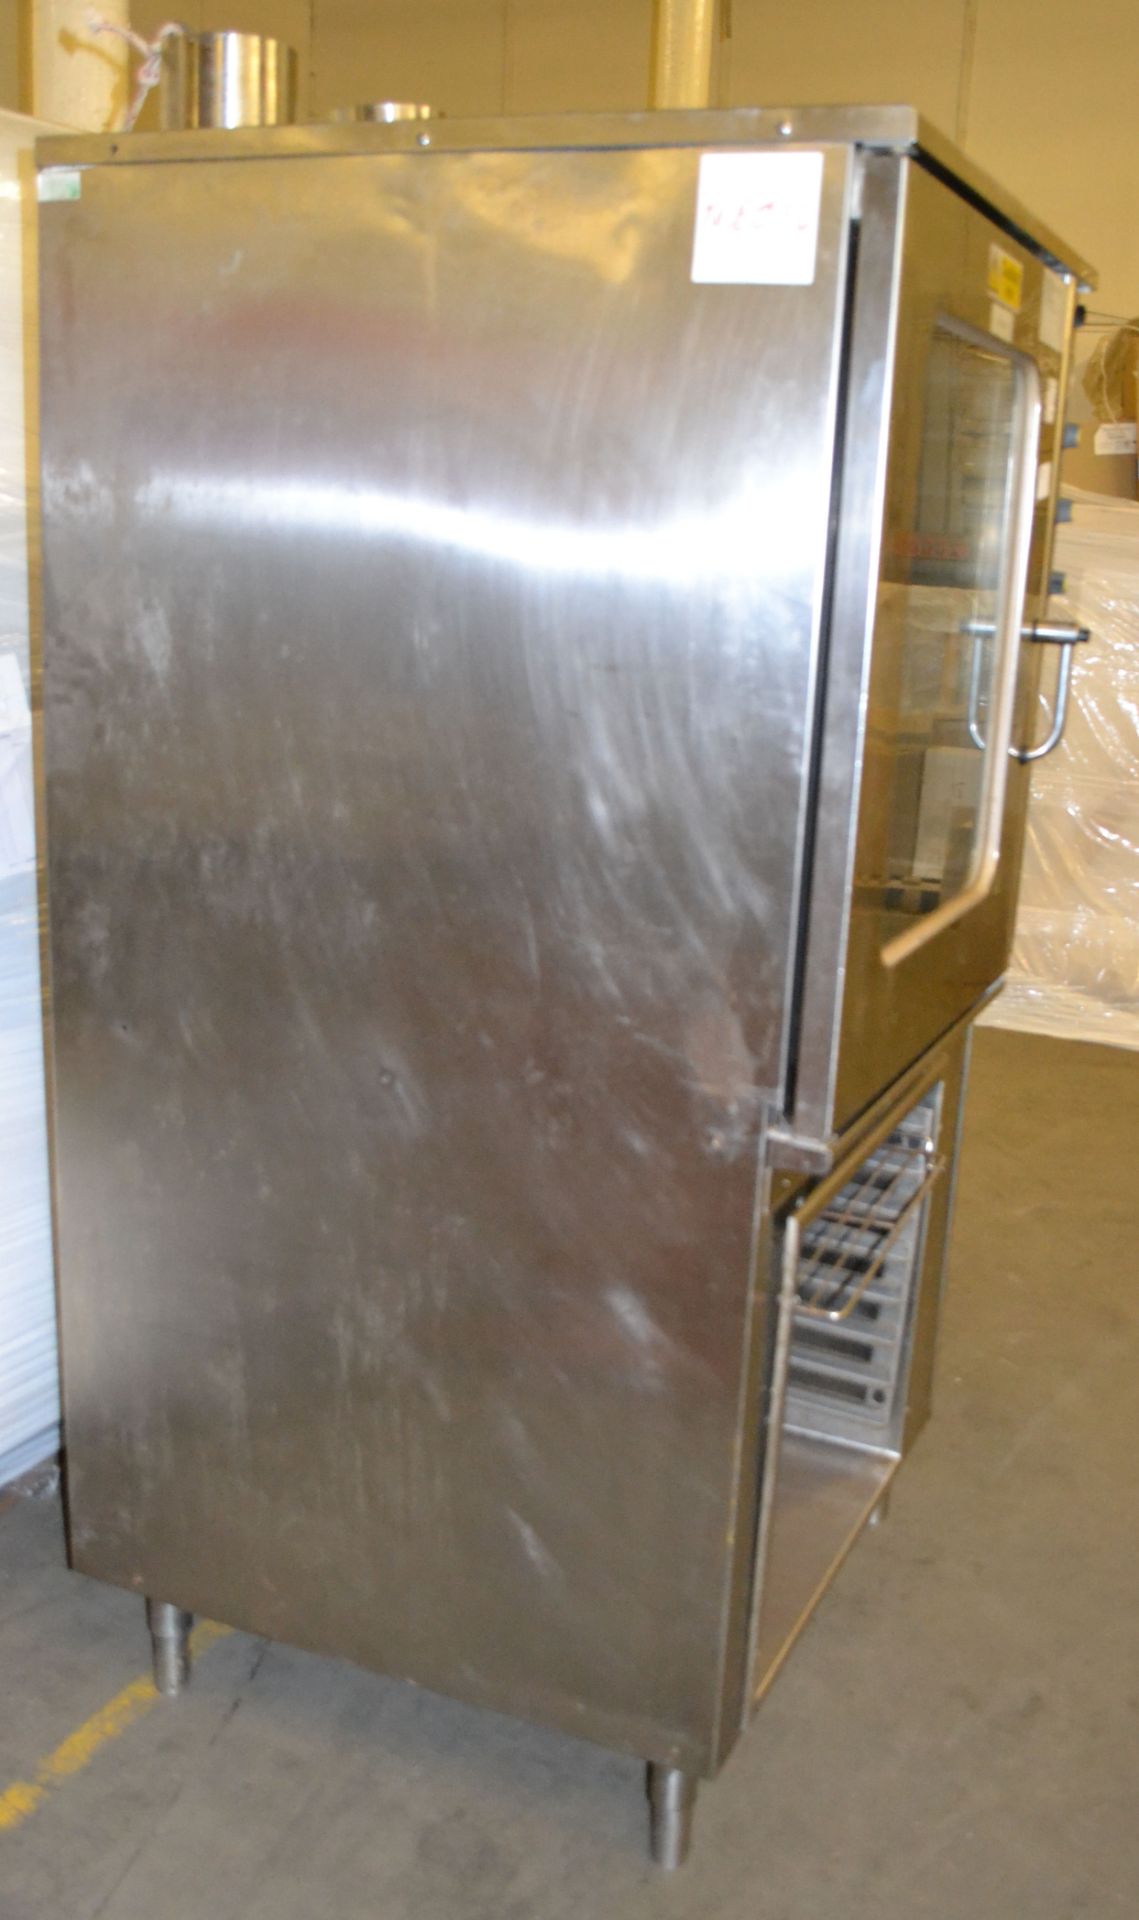 1 x Lainox MG110M LX Type Combination Oven with Pan Capacity - Ref:NCE032 - CL007 - Location: Bolton - Image 5 of 15